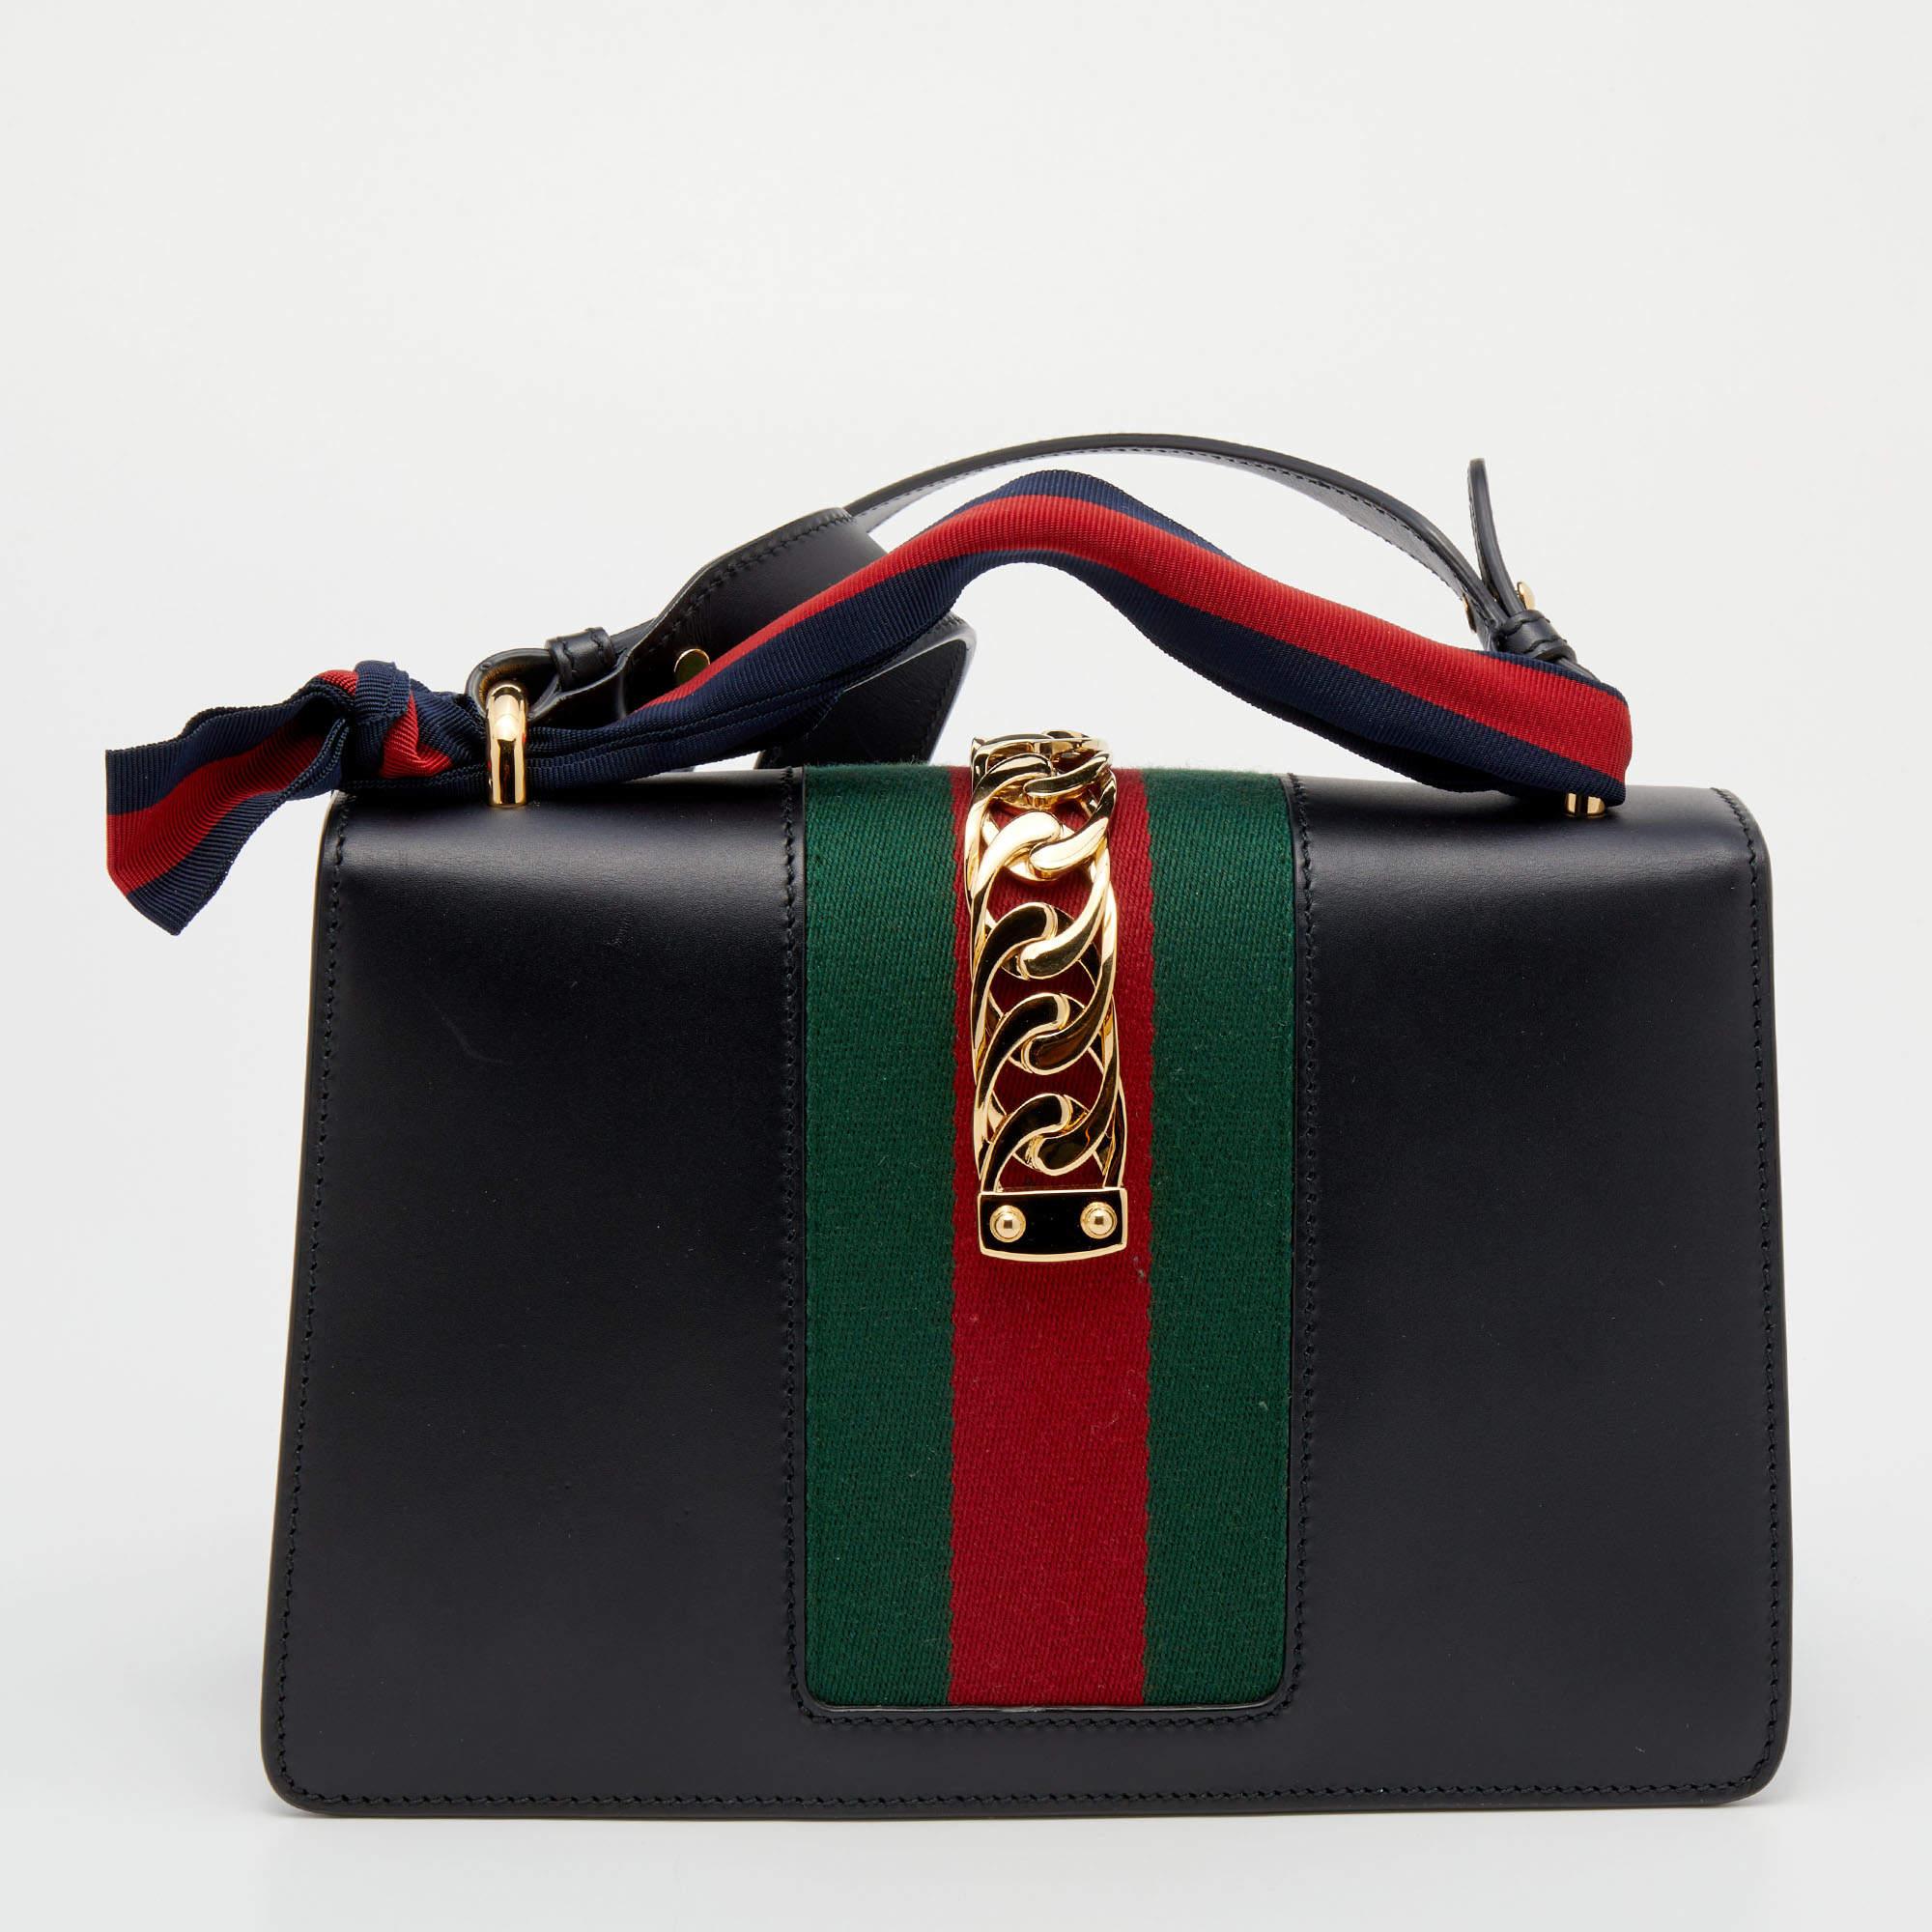 This Sylvie bag from the House of Gucci emerges as an everlasting icon of opulence and elegance with its brilliantly-designed structure. It is crafted from black leather and it has the iconic Web strap with gold-tone chain detailing on the flap.